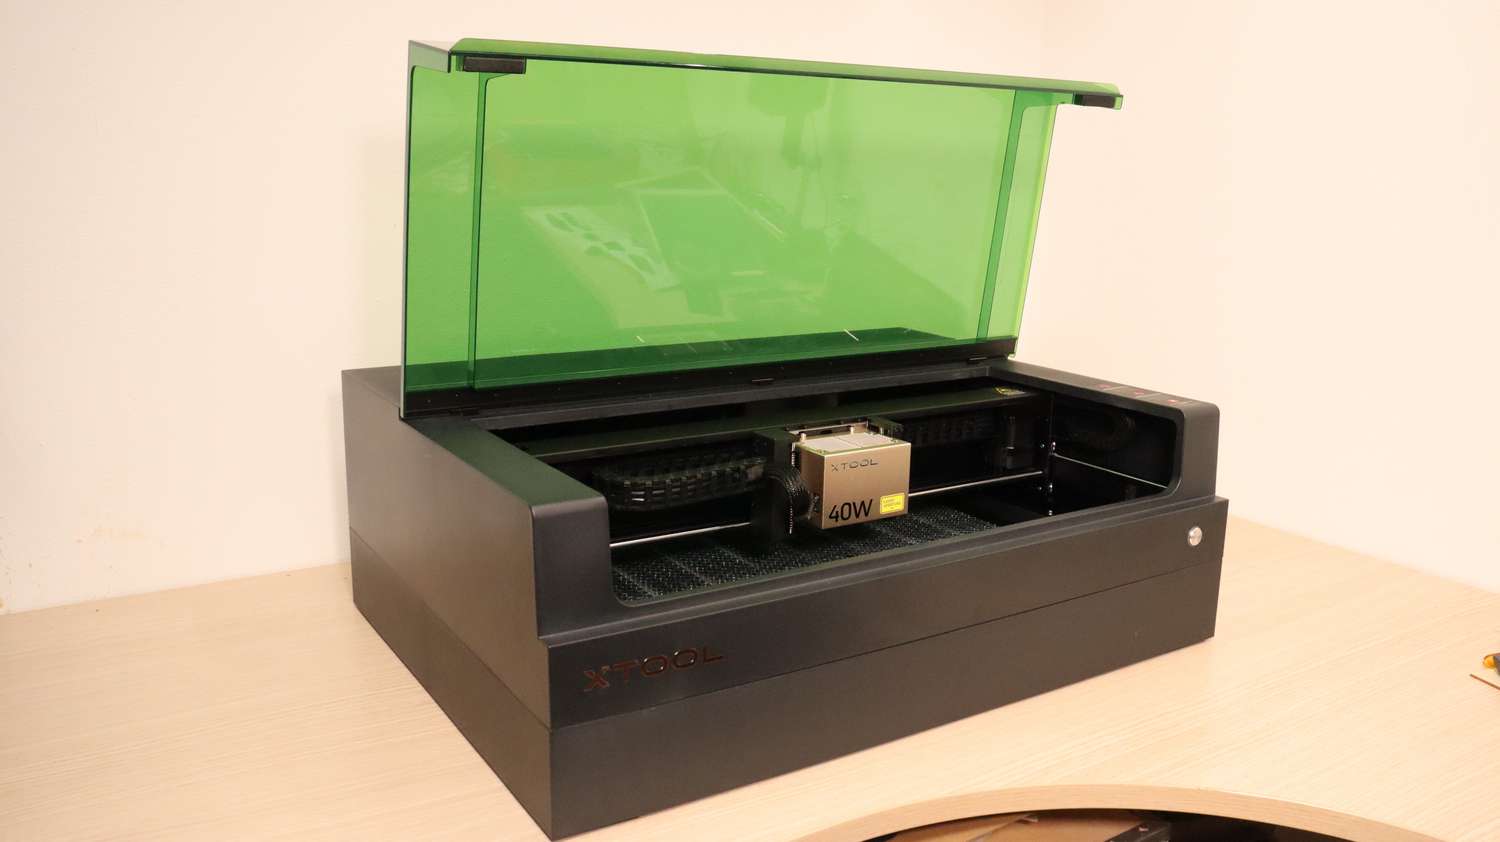 xTool S1 Review: Amazing Fully Enclosed 40w Diode Laser Cutter